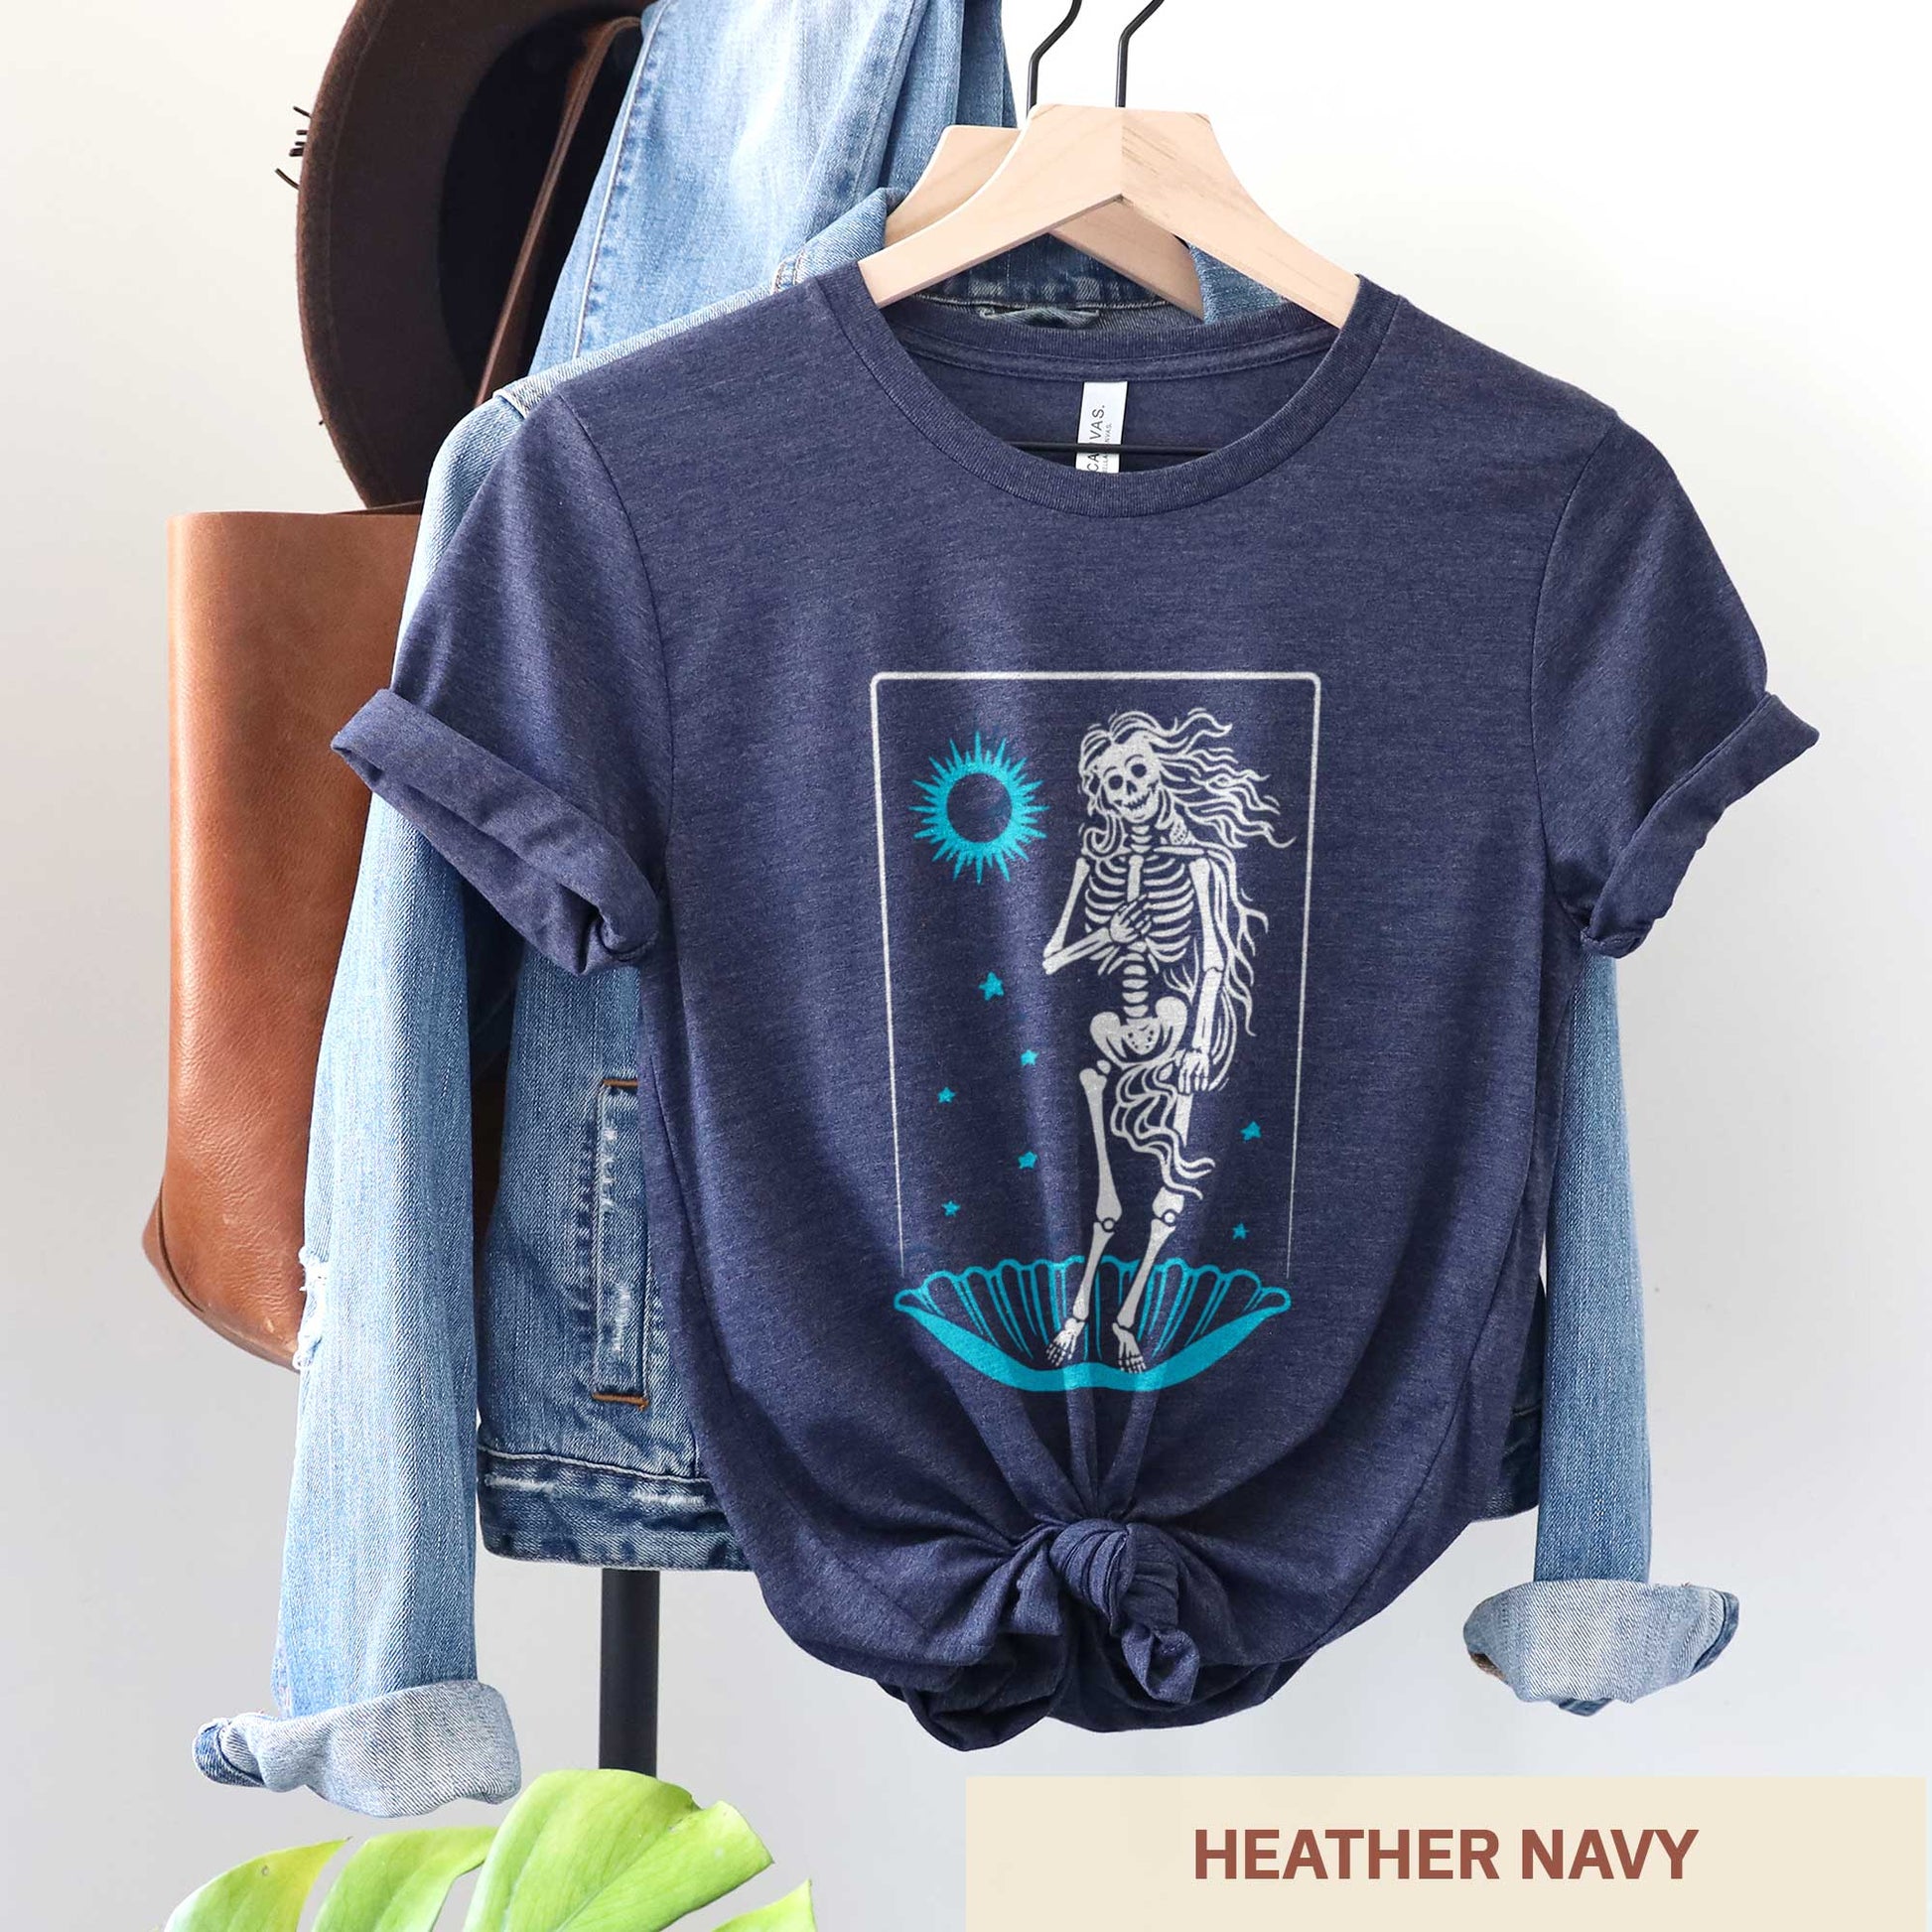 A hanging heather navy Bella Canvas t-shirt that features a skeleton in a pose similar to Botticelli's Birth of Venus painting.